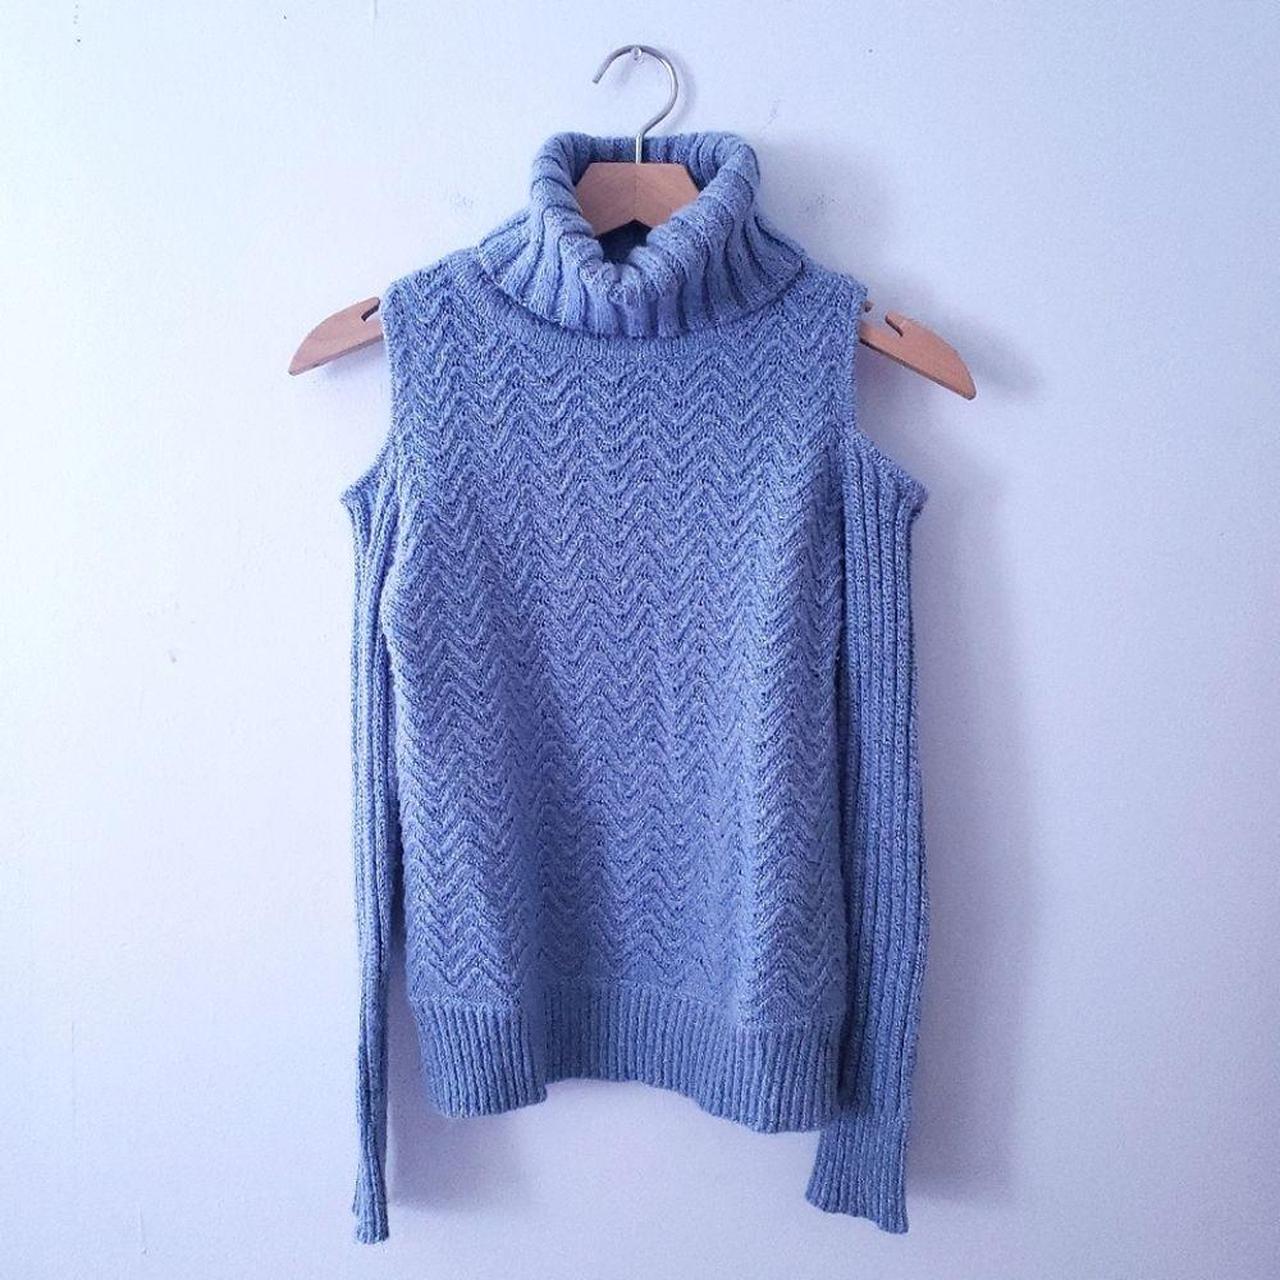 ∆ chevron knit sweater from American Rag, ∆...